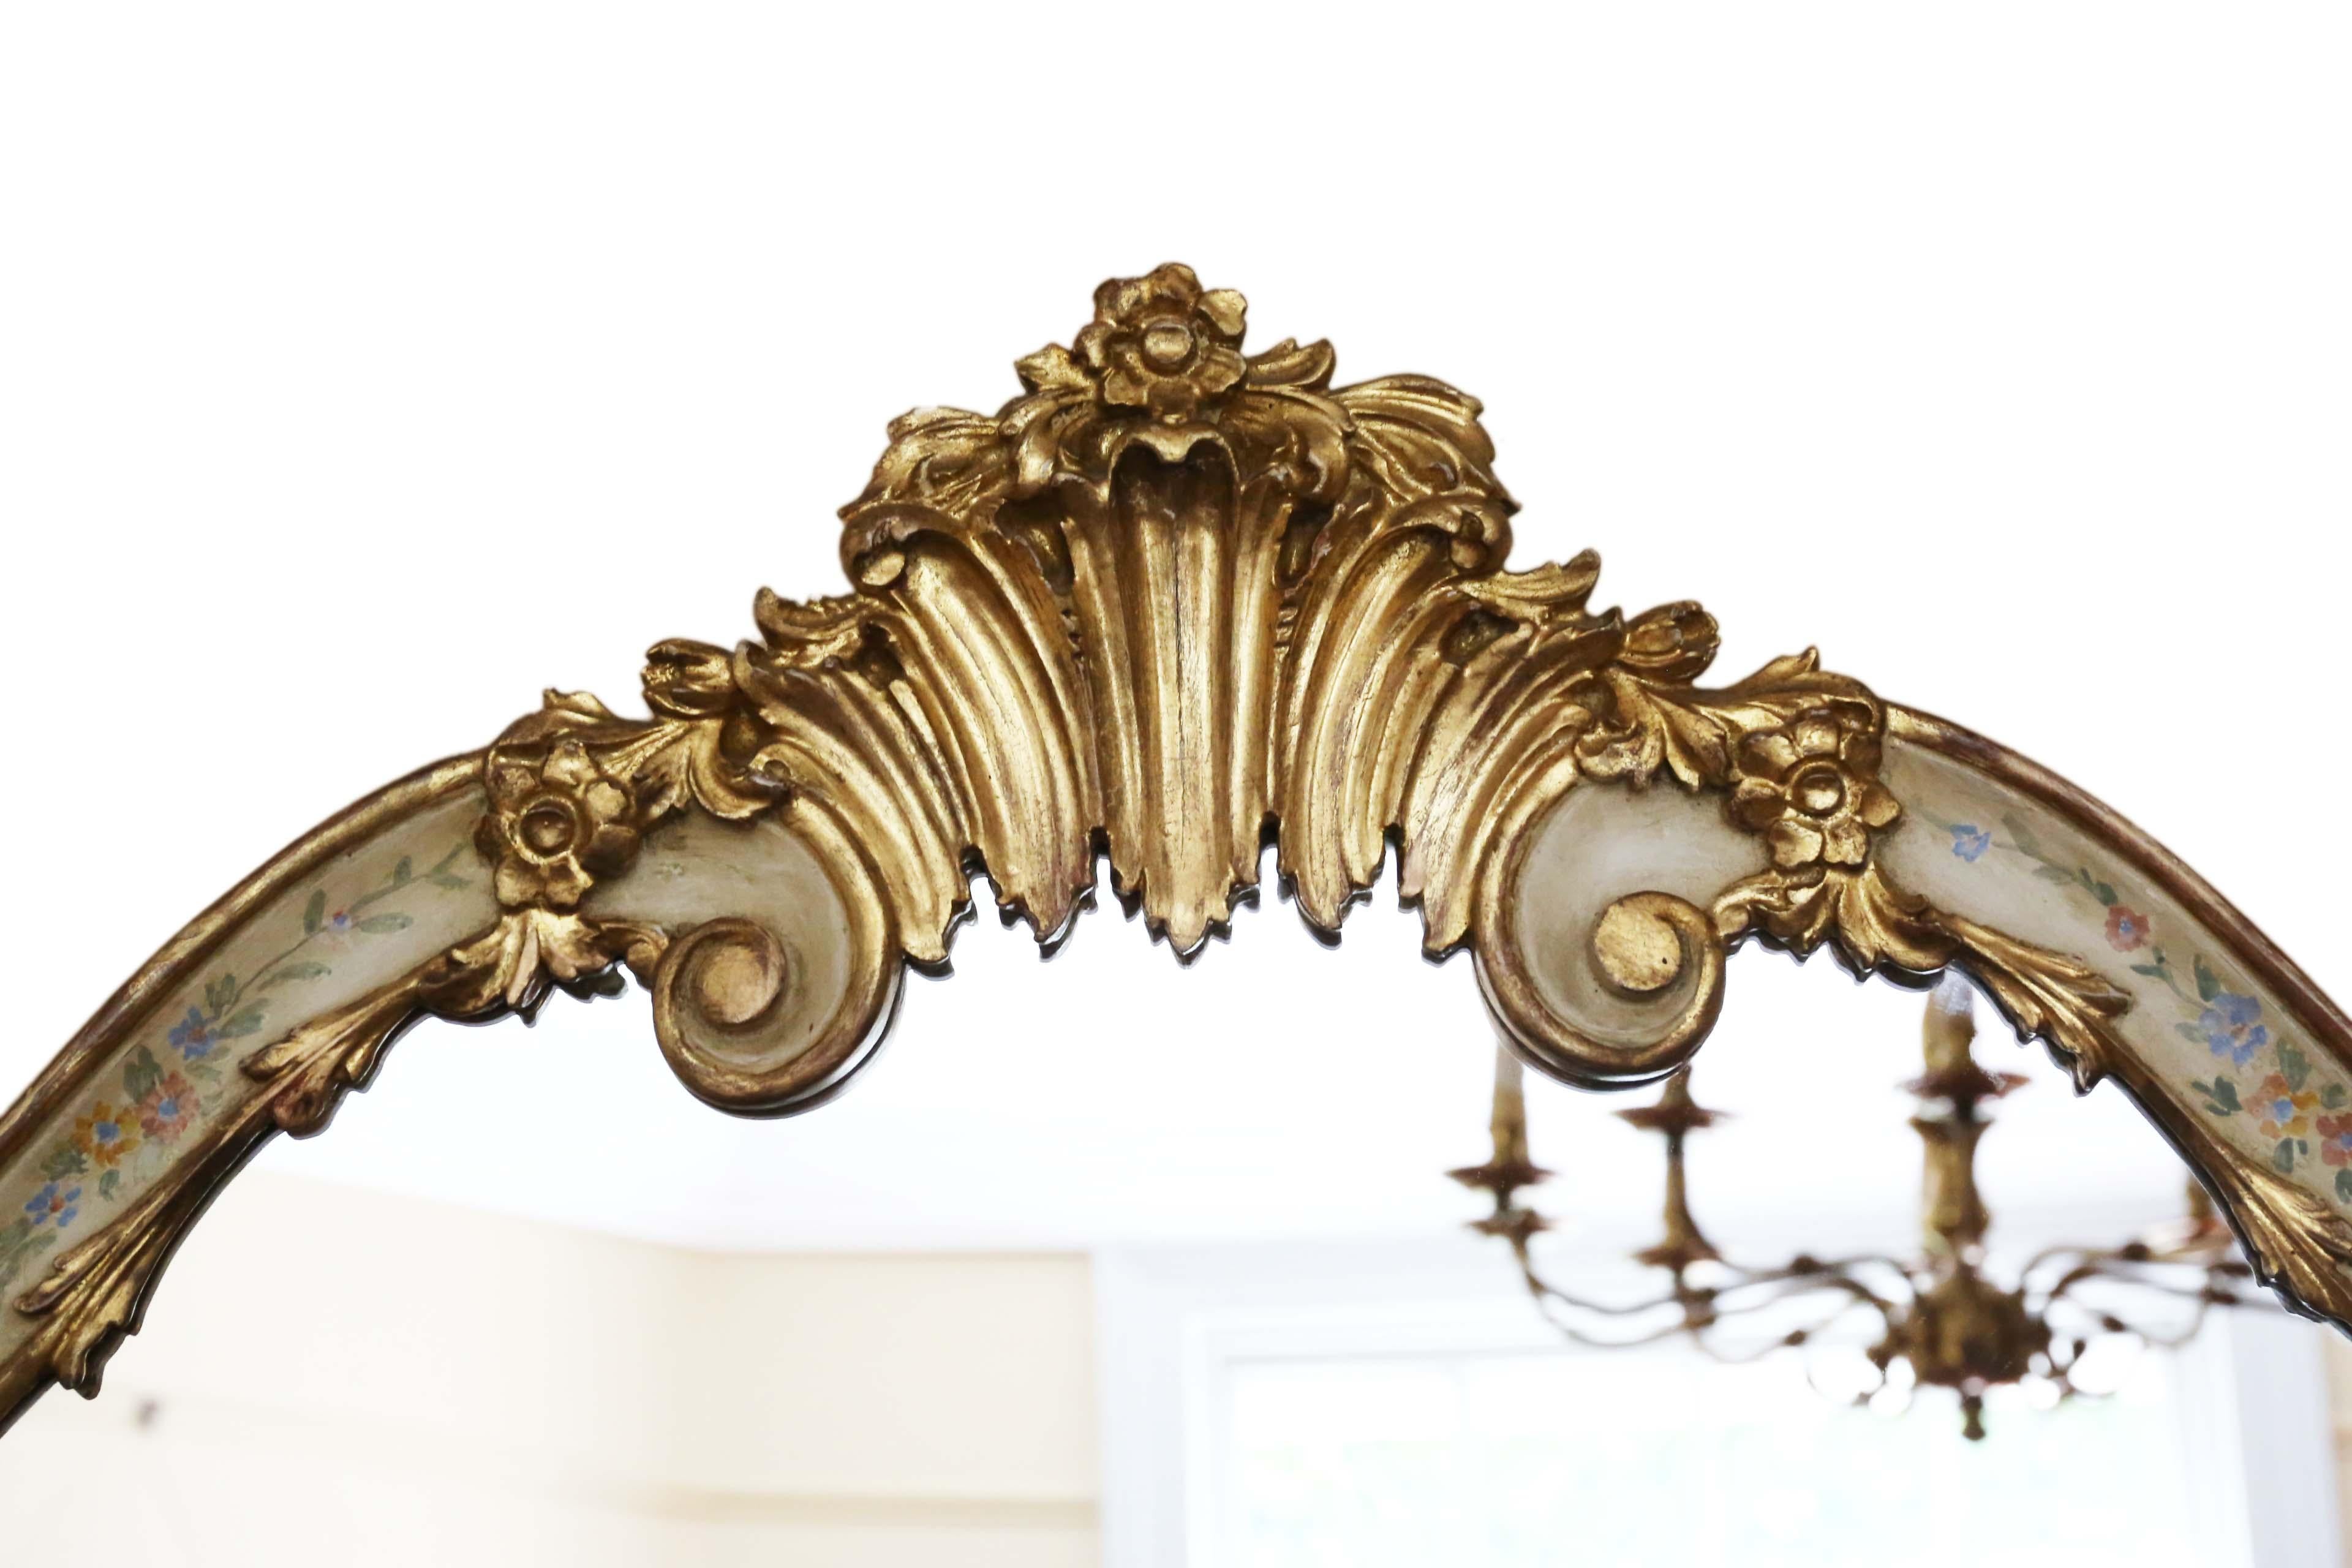 Antique pair of large quality decorated gilt wall mirrors, 19th century. A great look.
Charming mirrors, that are full of age and character. Lovely frames with some minor losses and touching up. Most of the original finish remains. No loose joints